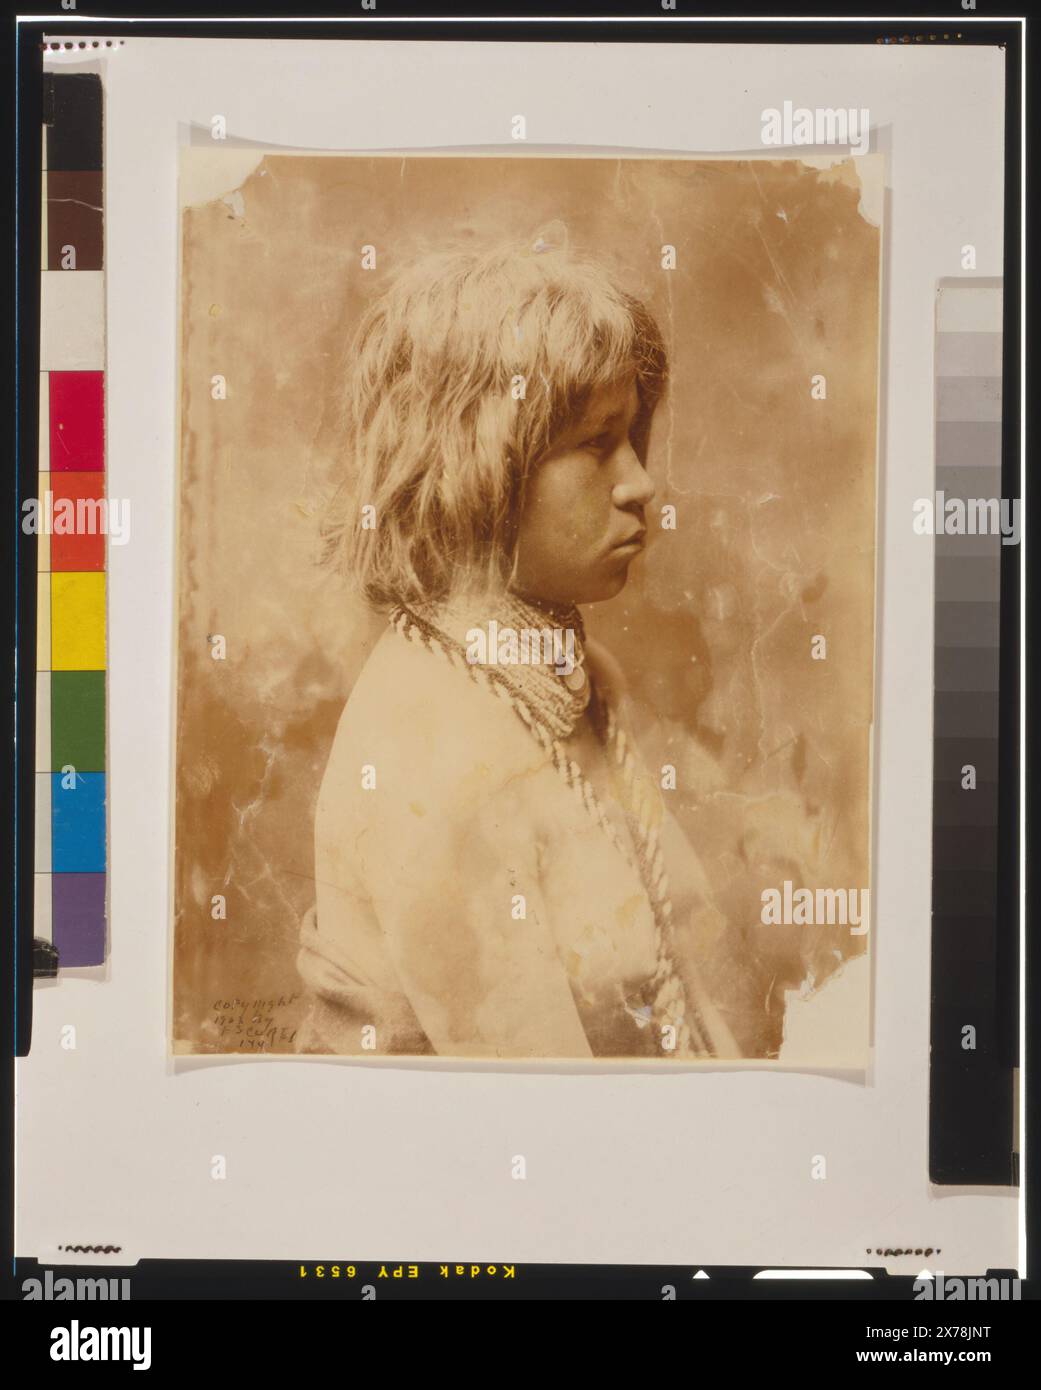 Judith Mohave, Curtis no. 144., LC no. 41., E.S. Curtis., Forms part of: Edward S. Curtis Collection ., Published in: The North American Indian / Edward S. Curtis. [Seattle, Wash.] : Edward S. Curtis, 1907-30, Suppl. v. 2, p. 59.. Indians of North America, 1900-1910. , Mohave Indians, 1900-1910. Stock Photo